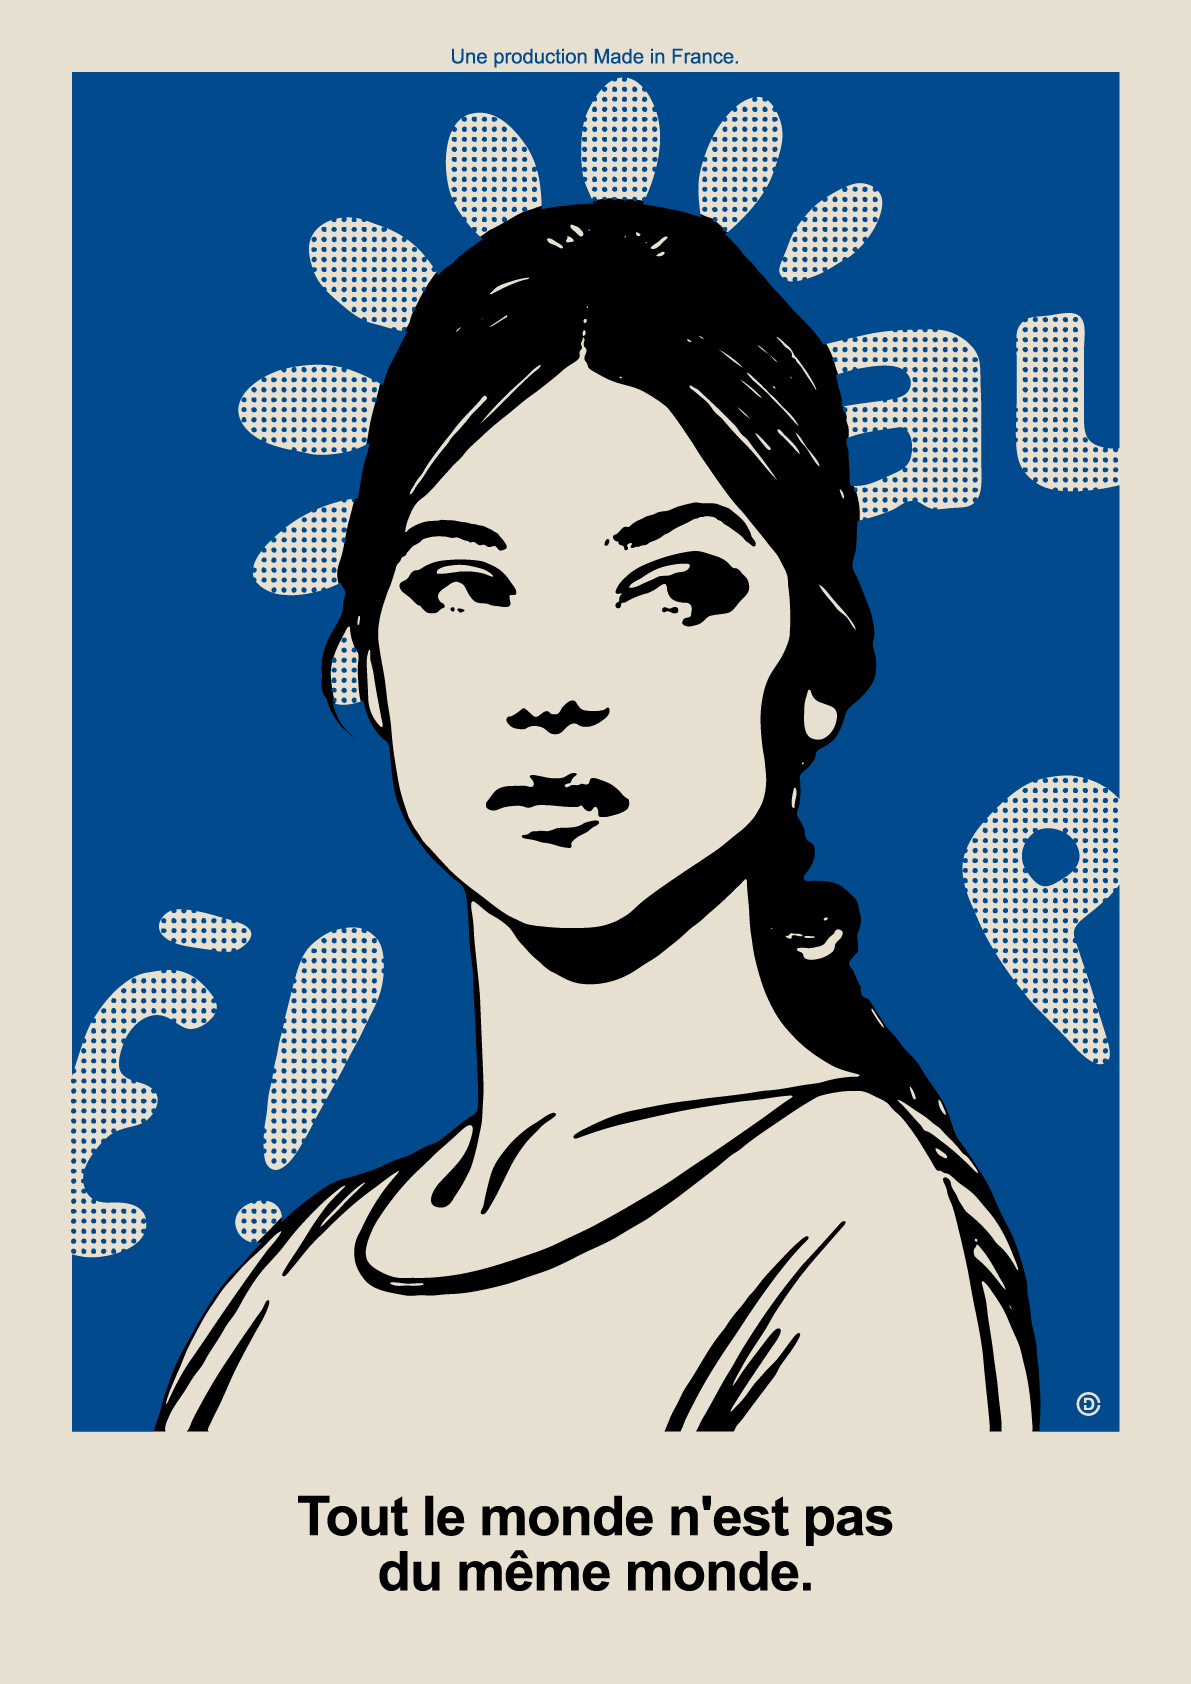 the blue and white image shows the portrait of an indian girl